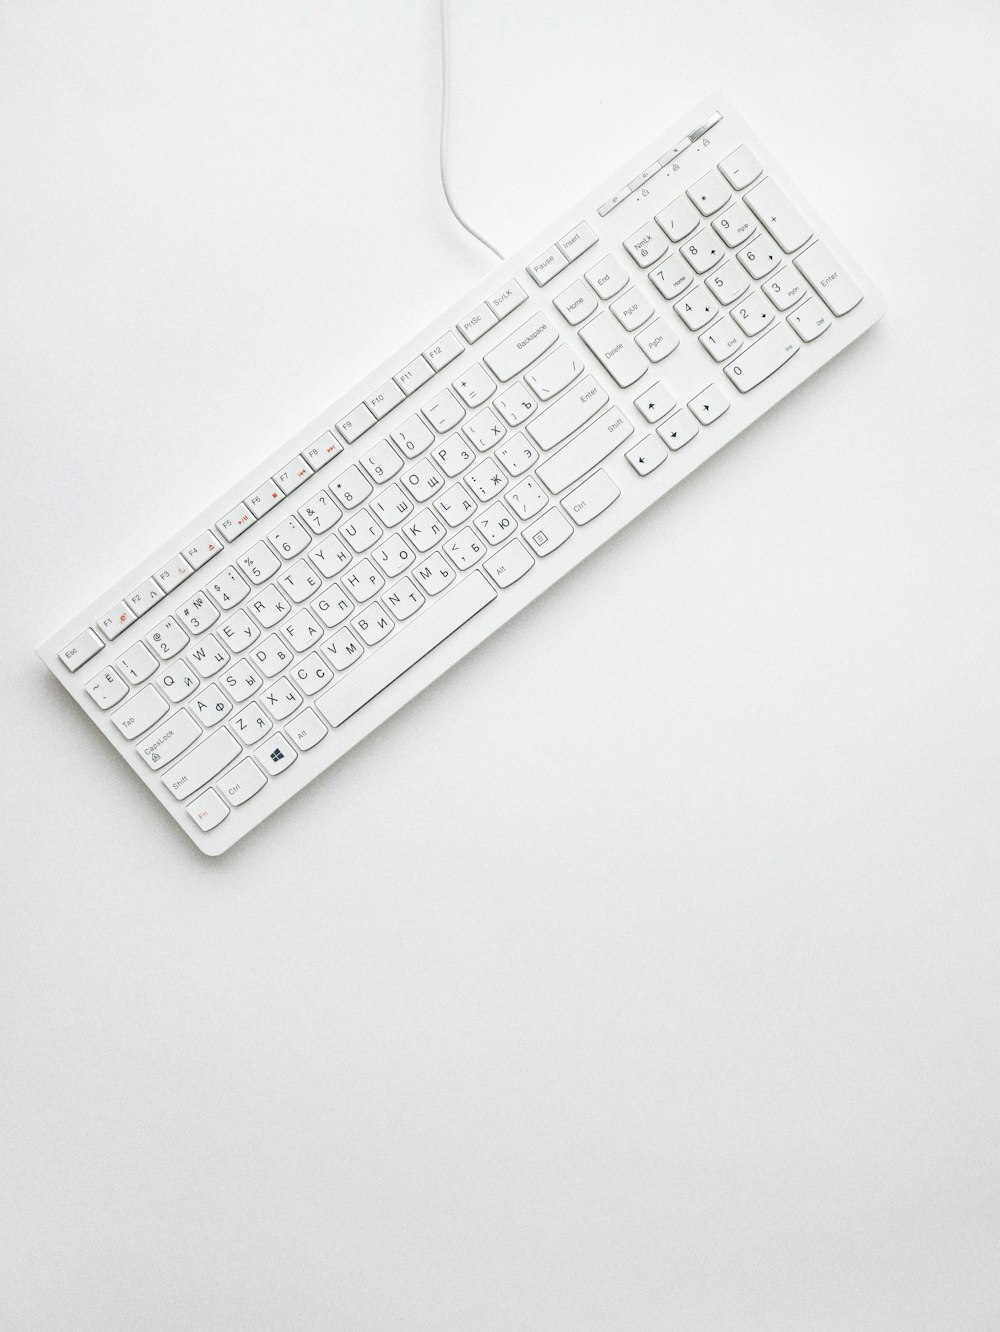 white corded computer keyboard on white surface